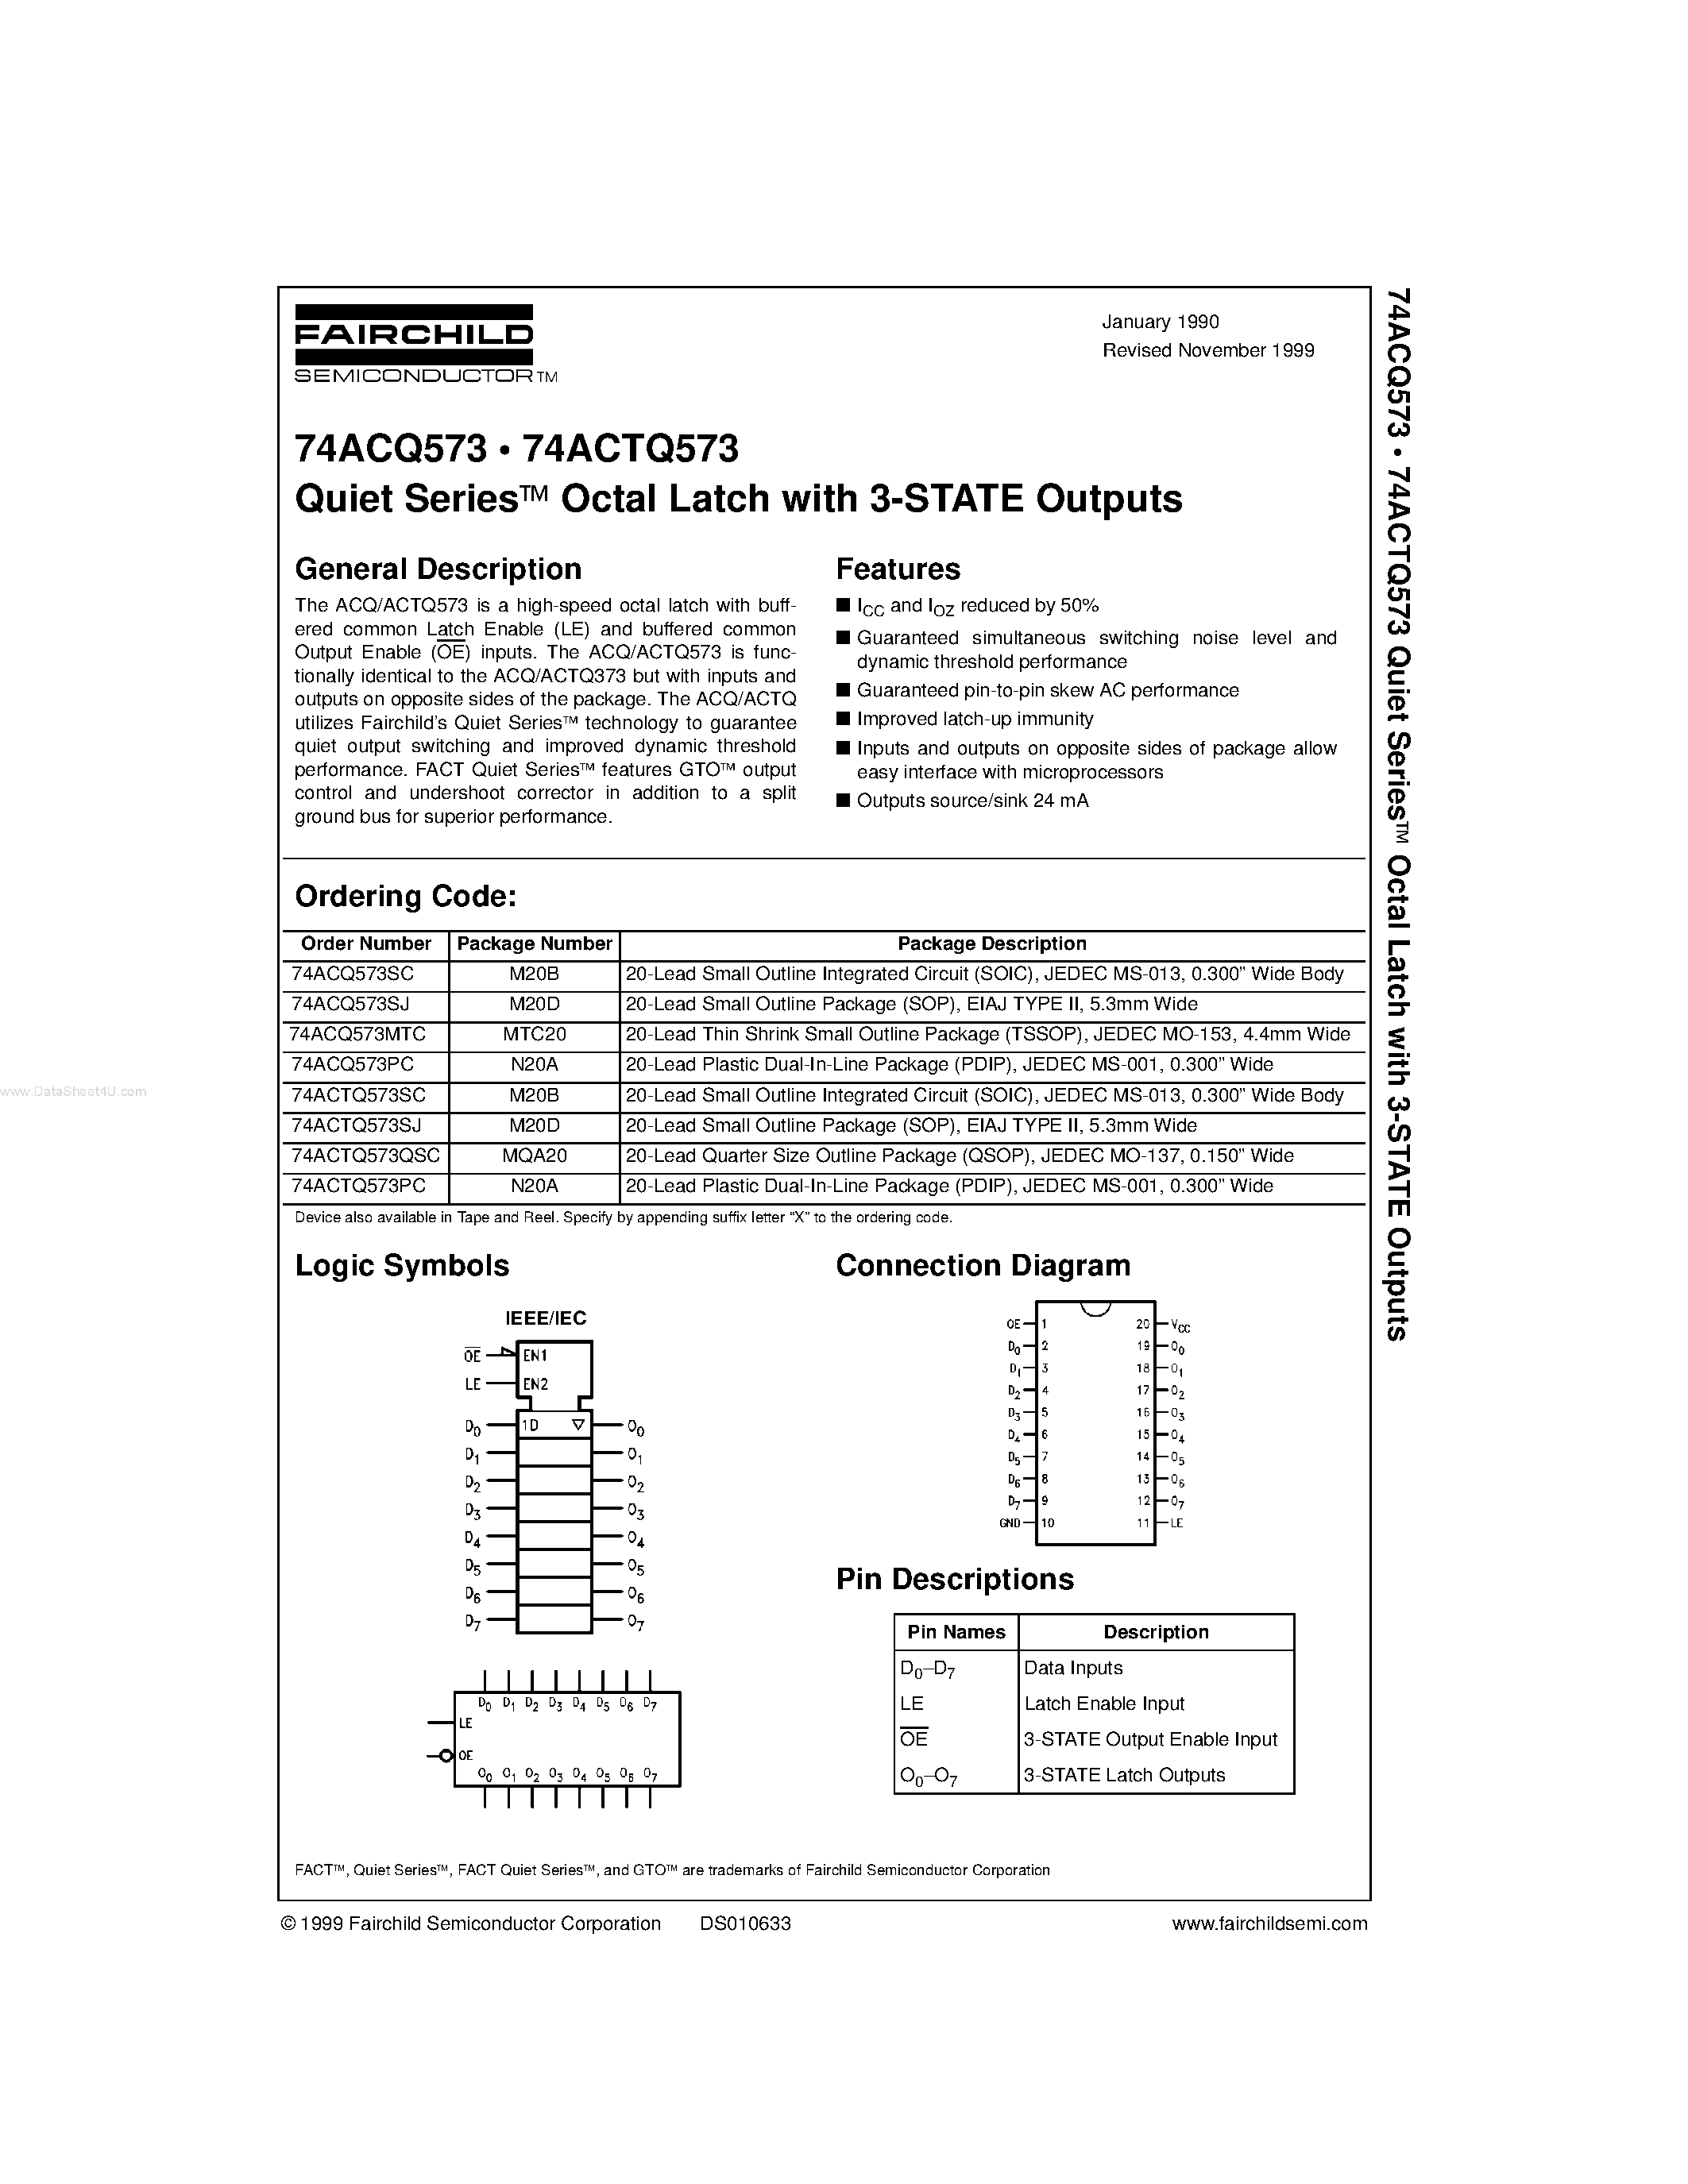 Datasheet 74ACQ573SC - Quiet Series Octal Latch with 3-STATE Outputs page 1